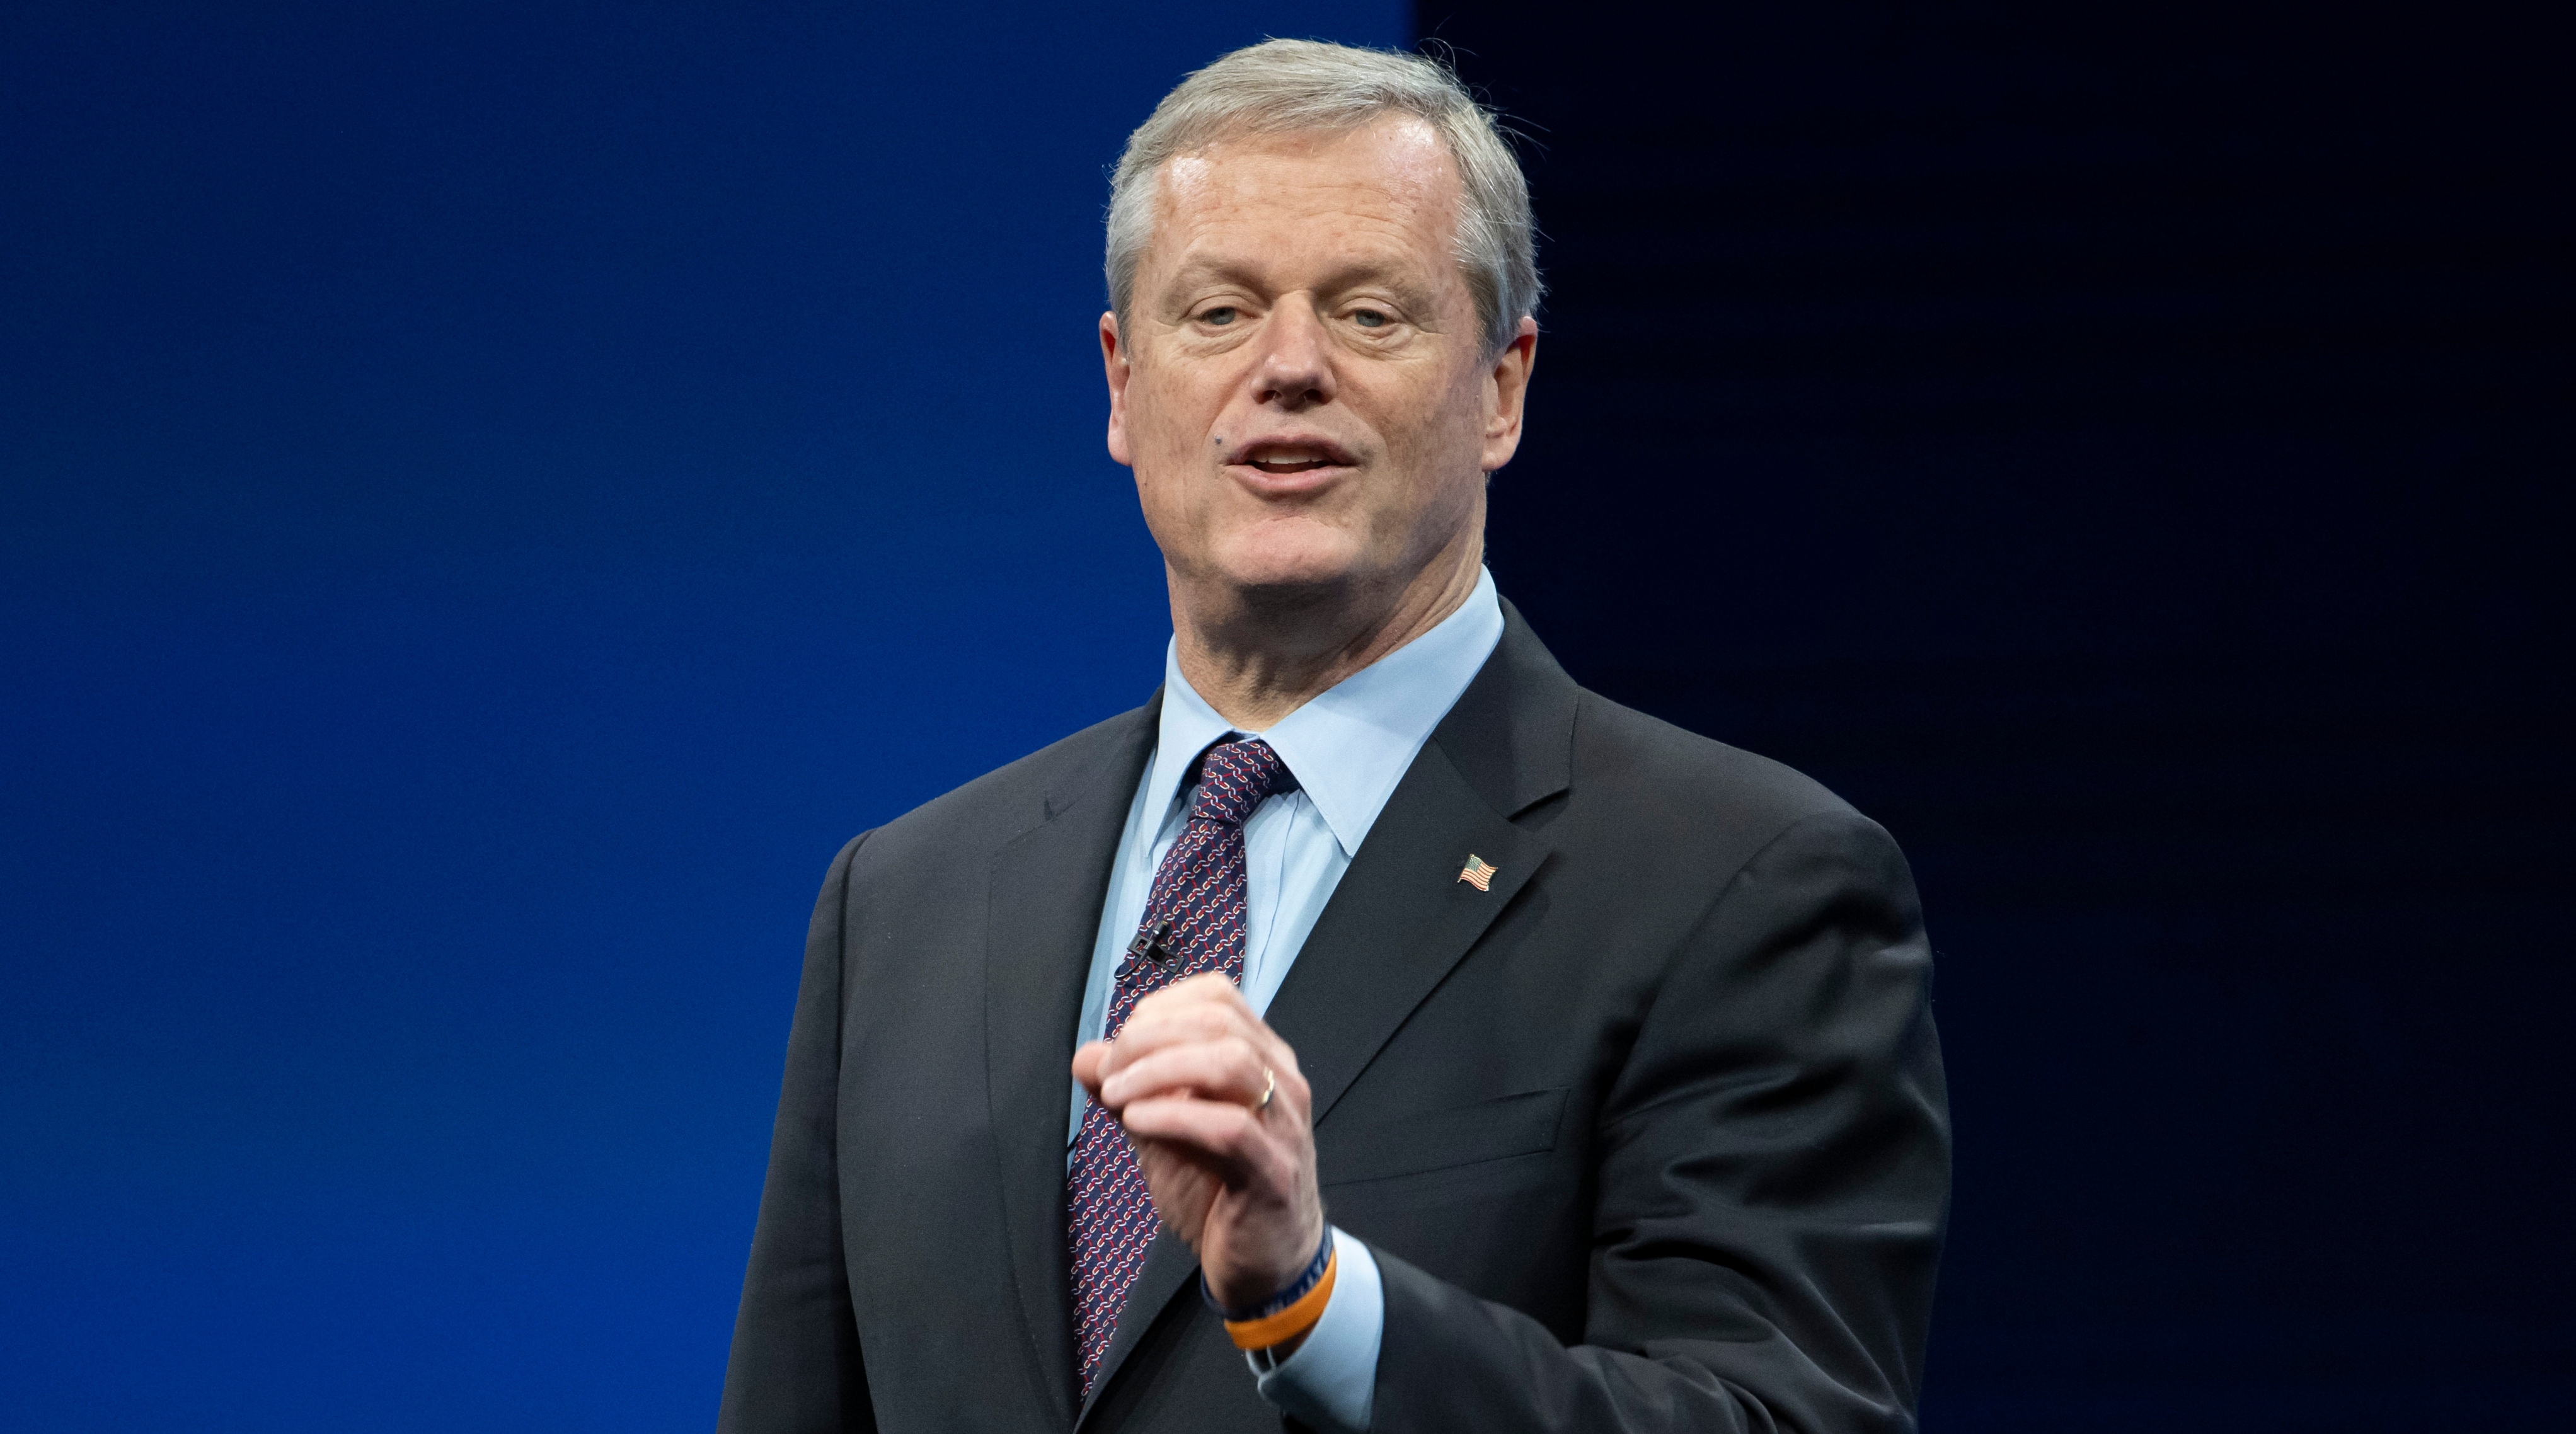 NCAA president Charlie Baker speaks during the NCAA Convention in San Antonio.